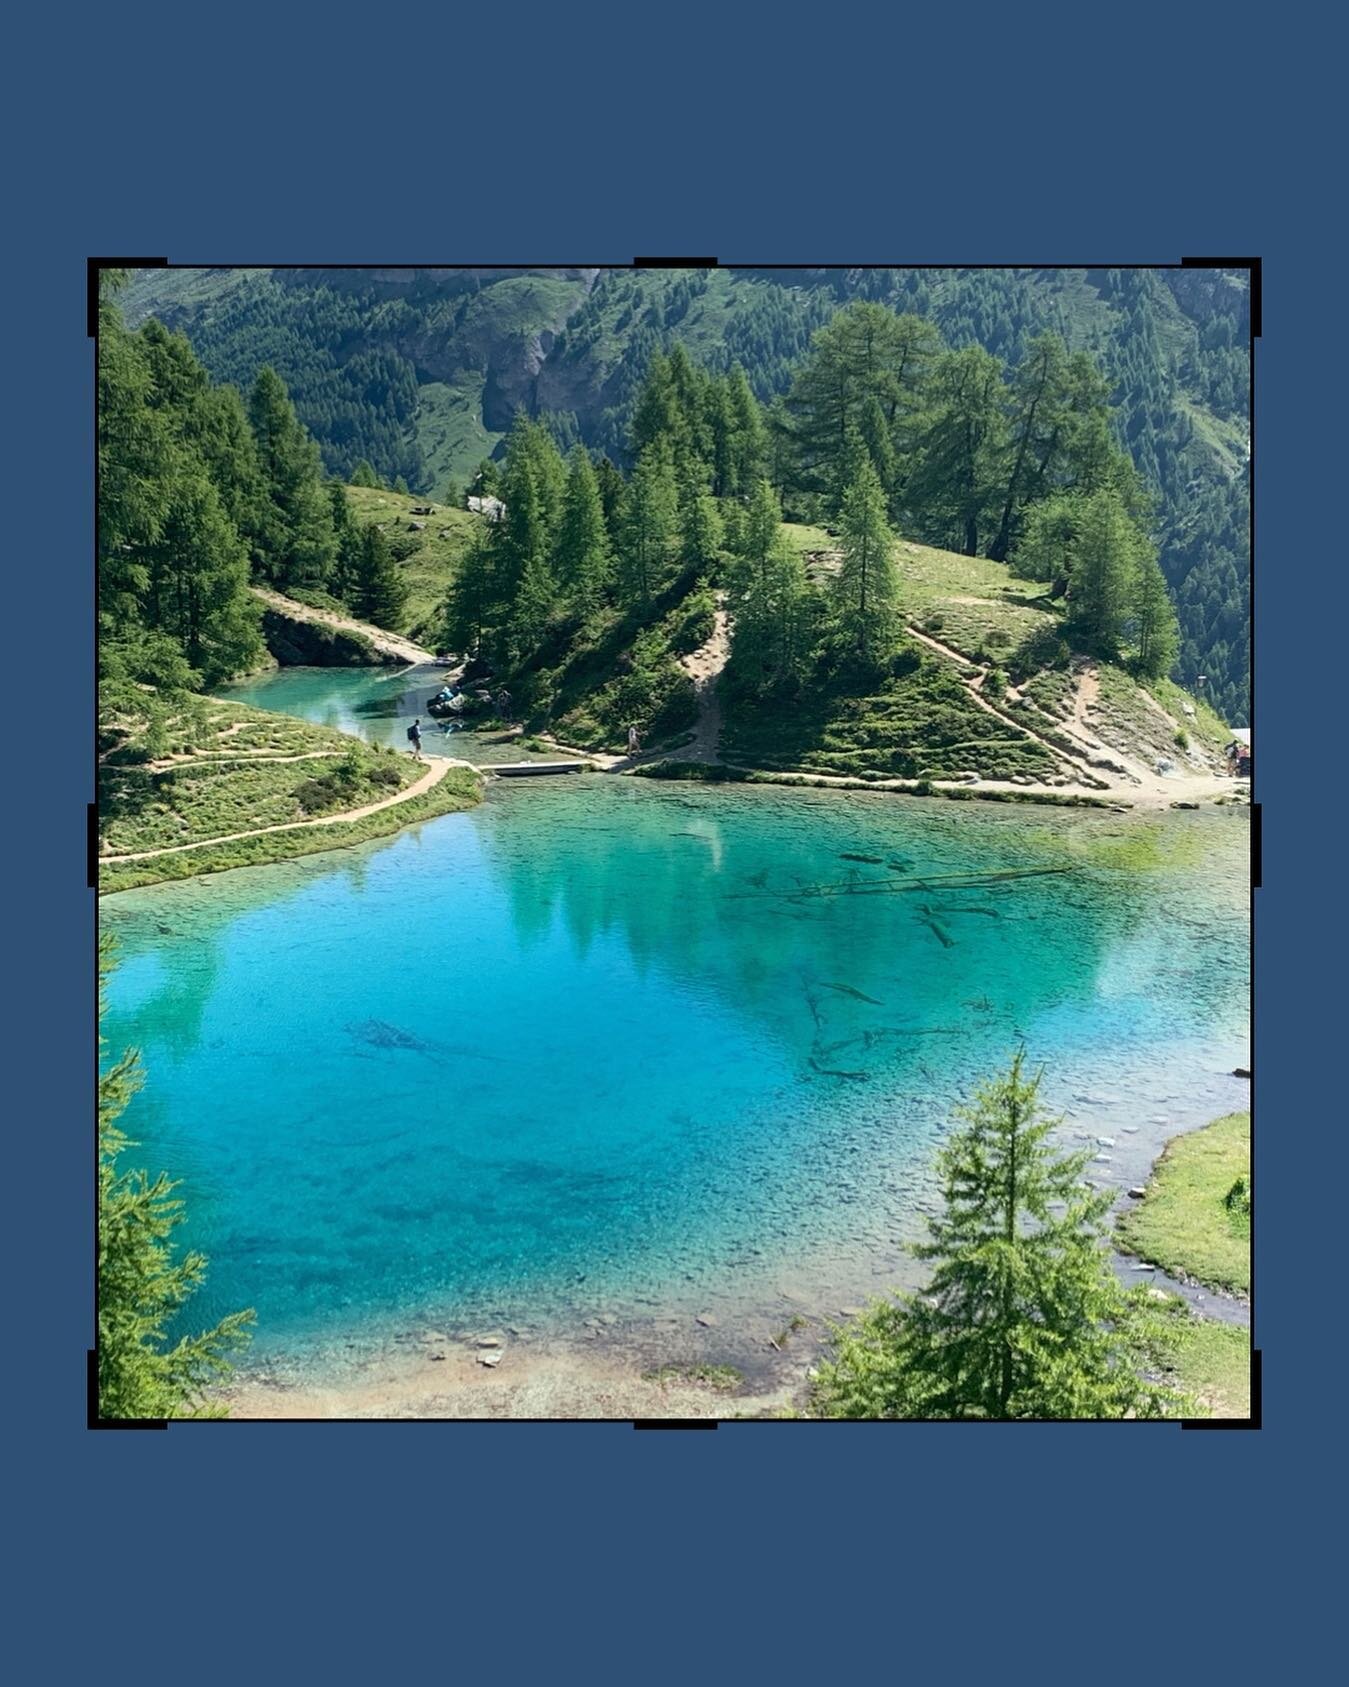 Whose up for Summer? We certainly are. Nothing quite beats the mountains on a hot and sunny Summer day. 

One of our all time favourite hikes is to Lac Bleu; climbing up through the forests and then arriving at the majestic and crystal clear lake is 